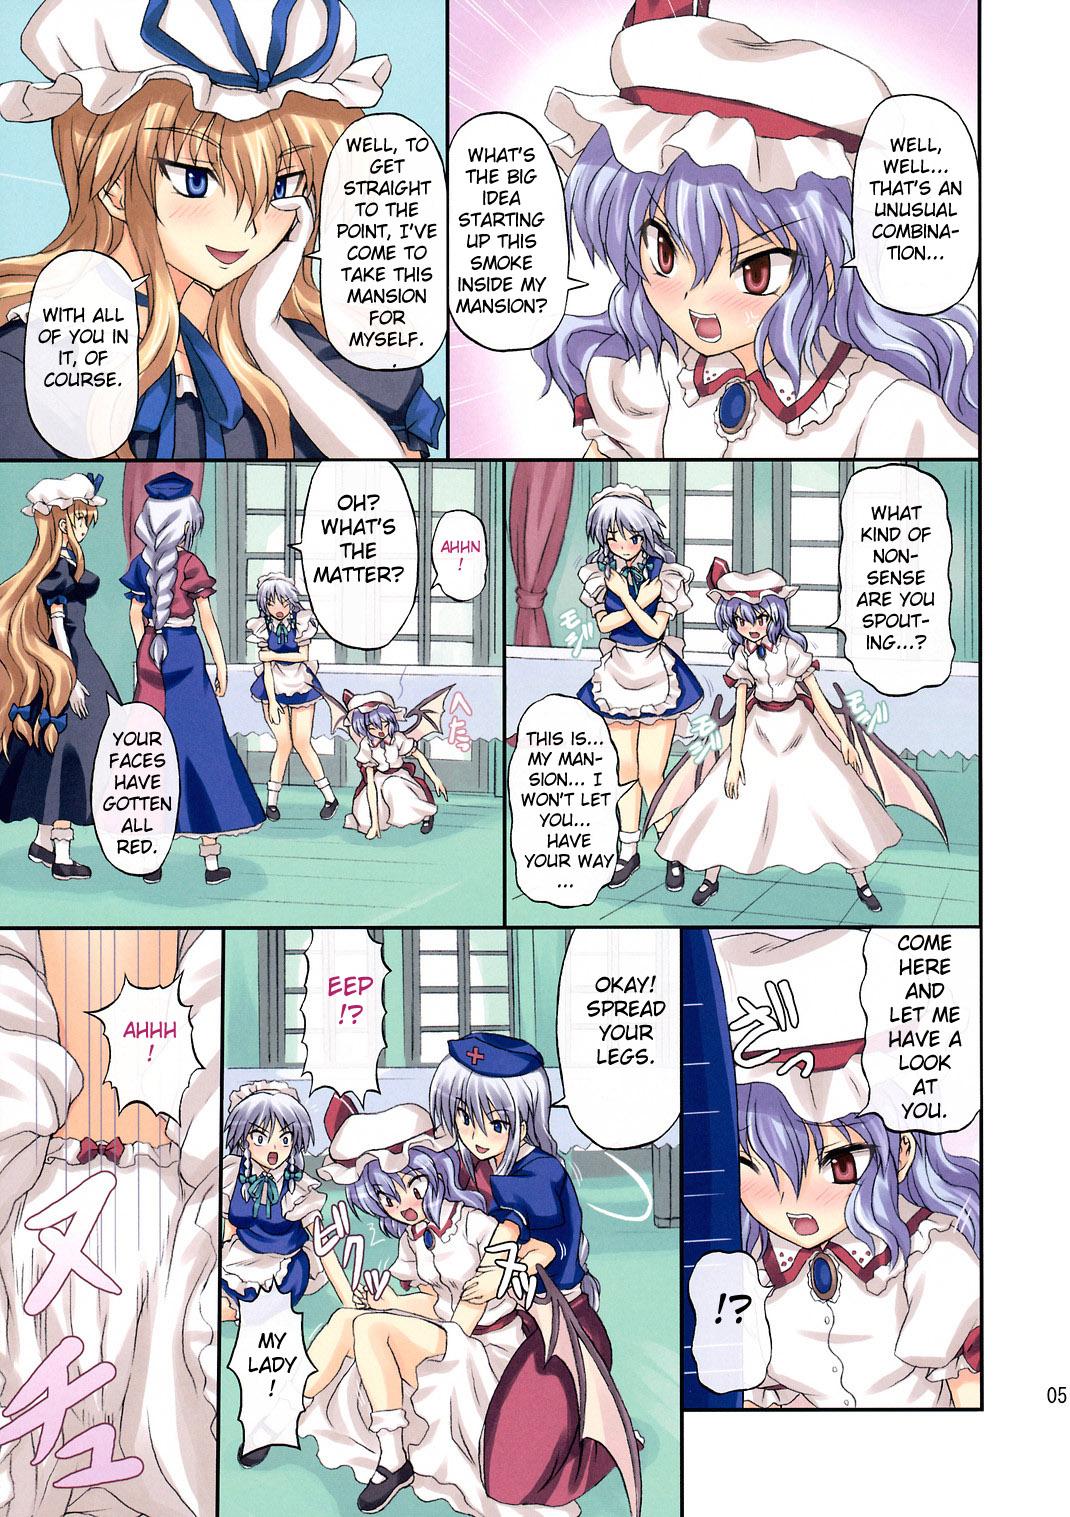 Bra Extend Party - Touhou project Moneytalks - Page 5